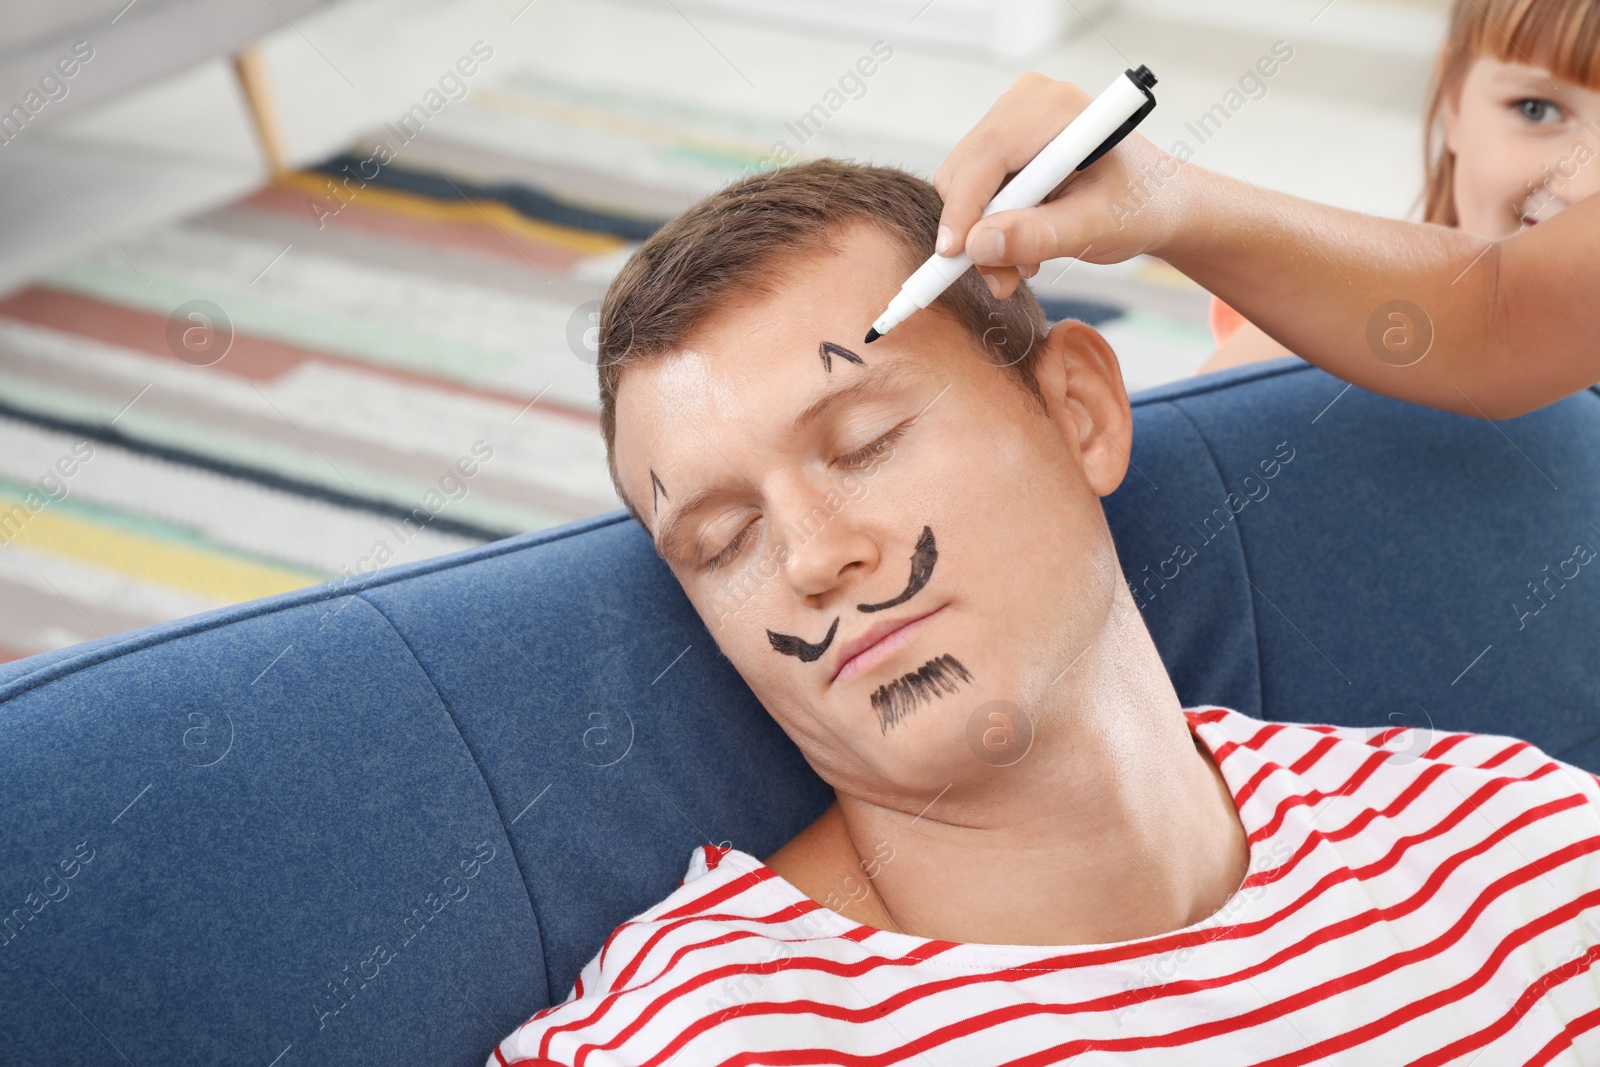 Photo of Child painting father's face while he sleeping on April Fool's Day